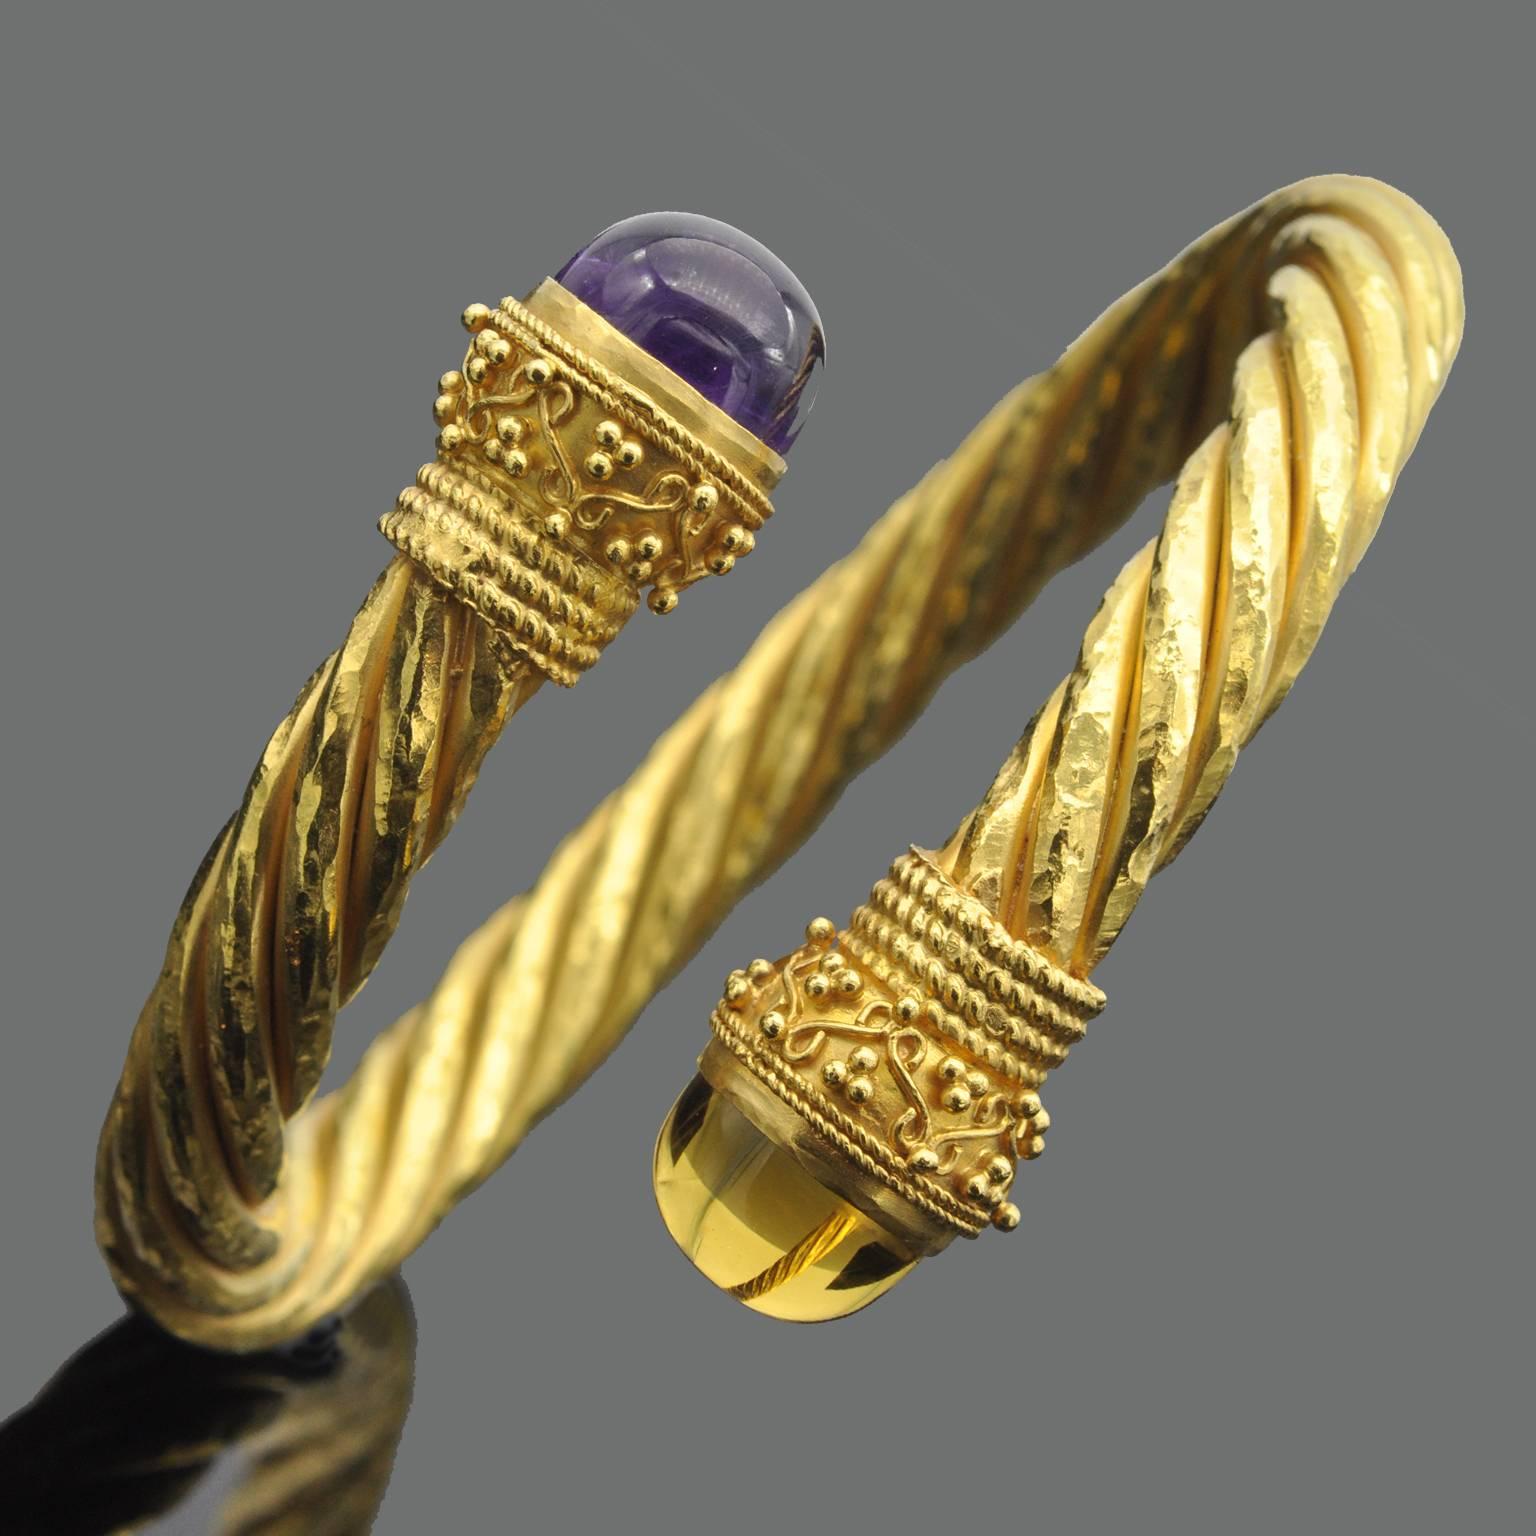 Greek revival even etruscan revival ! hammered gold , twirls, amethyst and citrine cabochon bezel set. Highly desirable bracelet.
You can wear two together  (see ref LU47233575101)